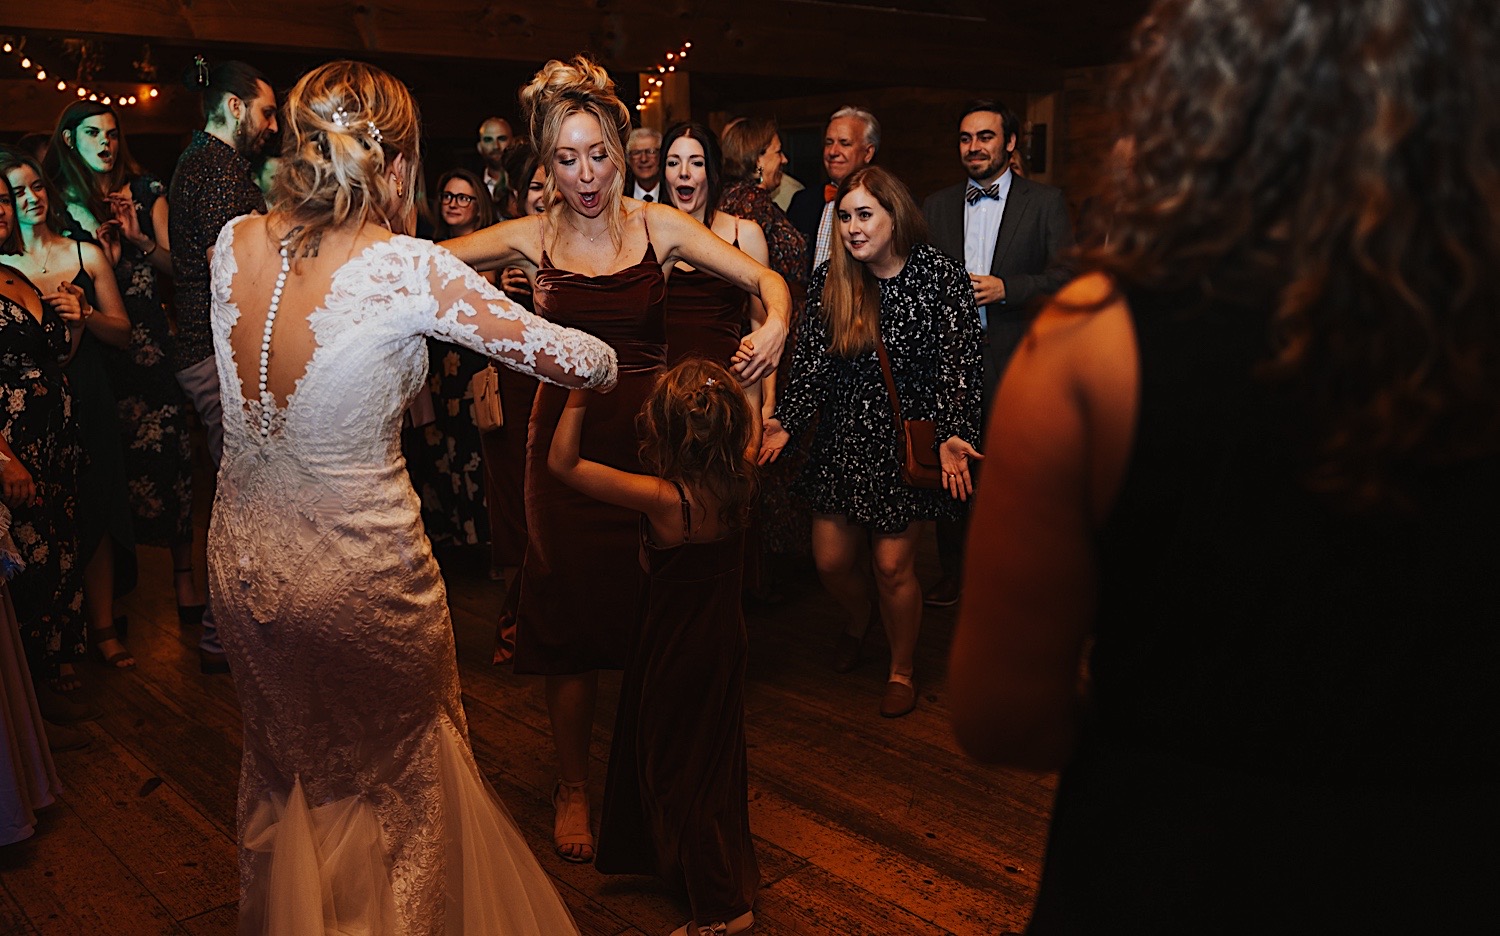 A bride dances with one of her bridesmaids and a young girl while in the middle of a dance circle during an indoor reception at Lake Bomoseen Lodge in Vermont